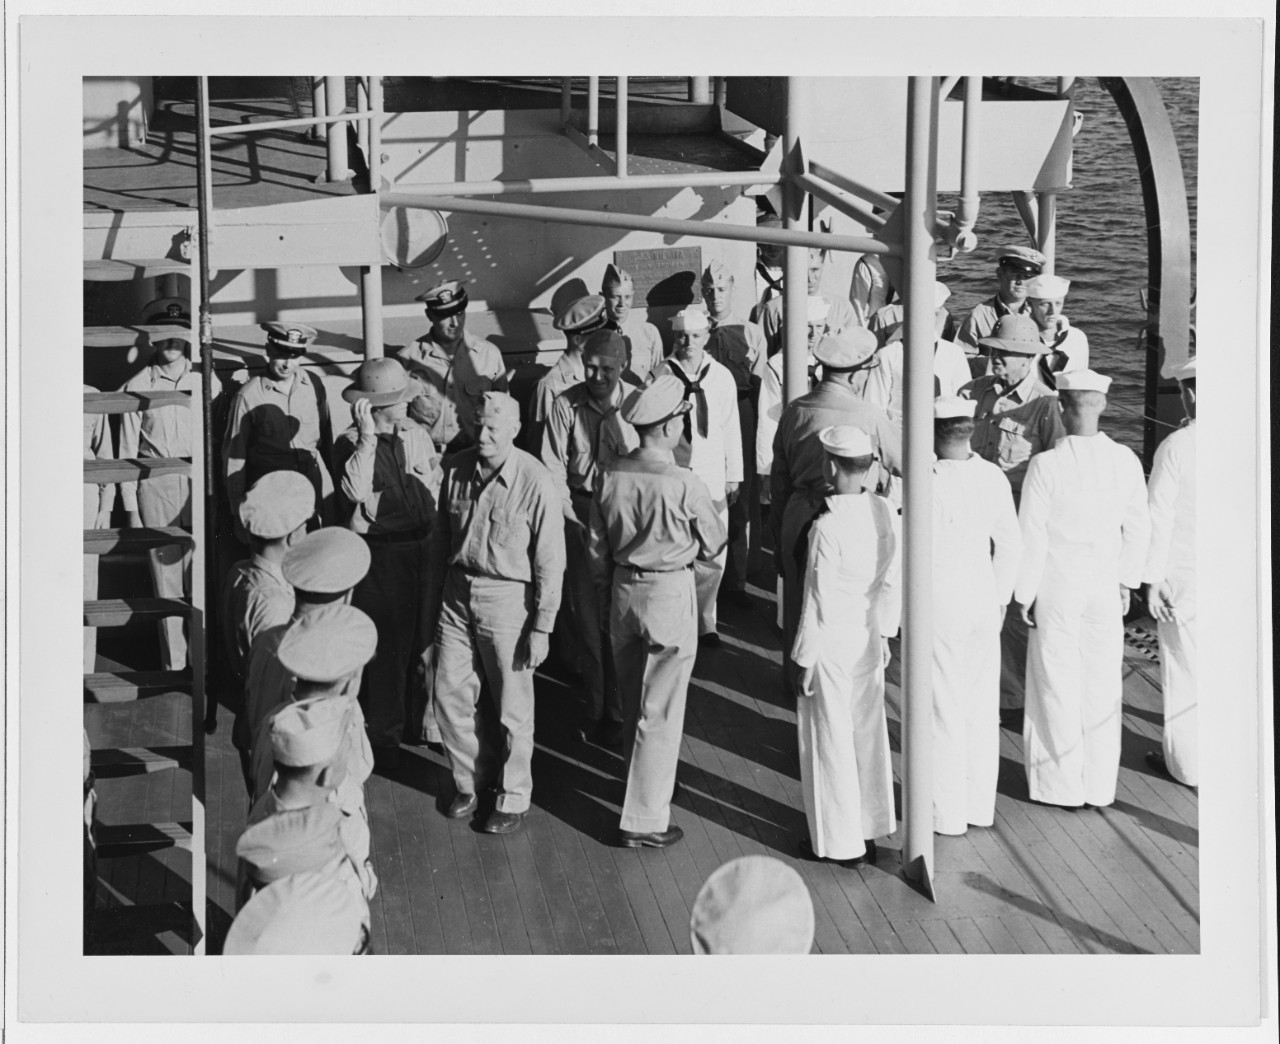 Secretary of the Navy Frank Knox, and Admiral  Chester W. Nimitz (CinCPac) make an inspection tour of American defenses at American Samoa.